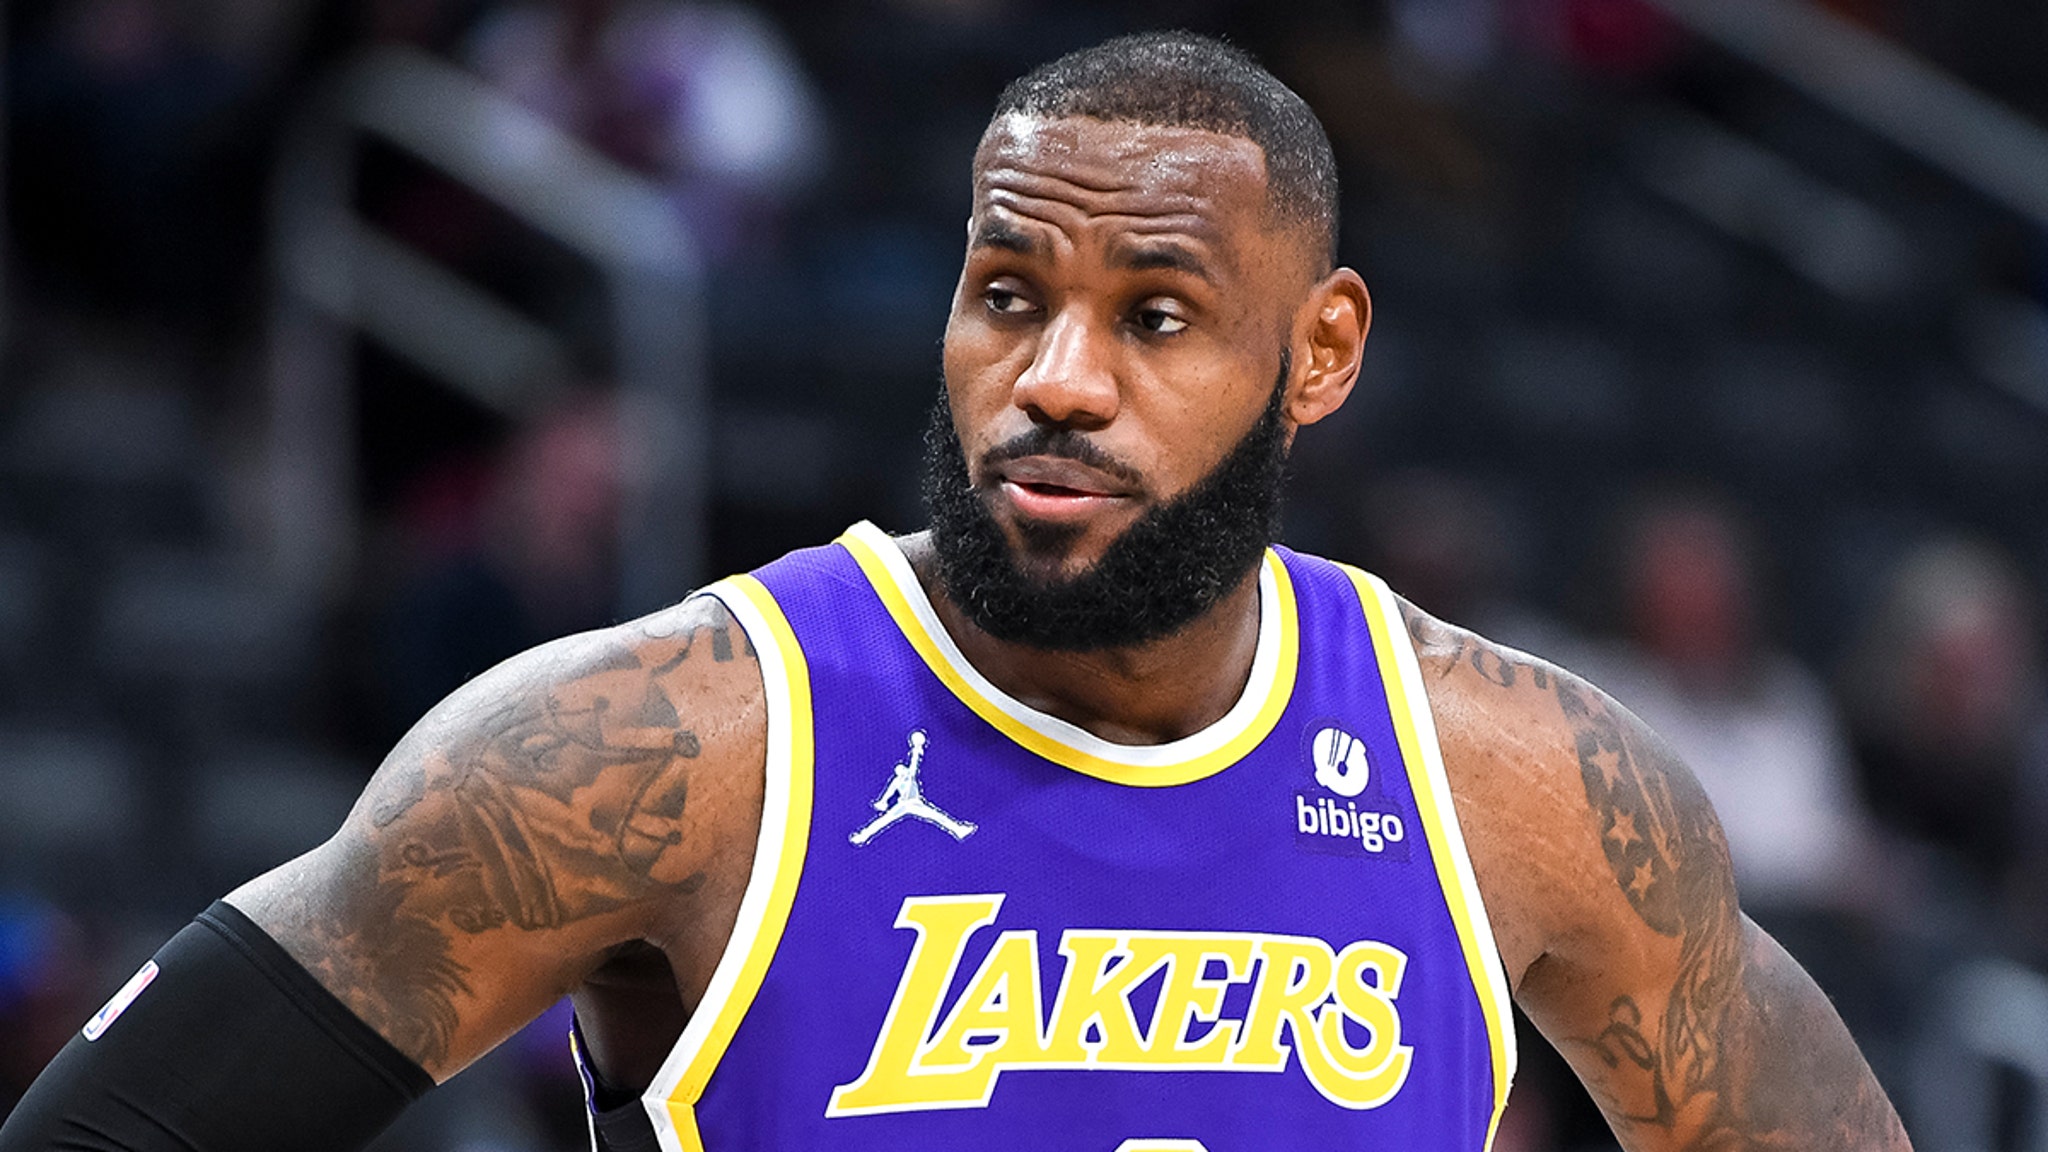 LeBron James Tests Positive For COVID-19, Will Miss Several Games